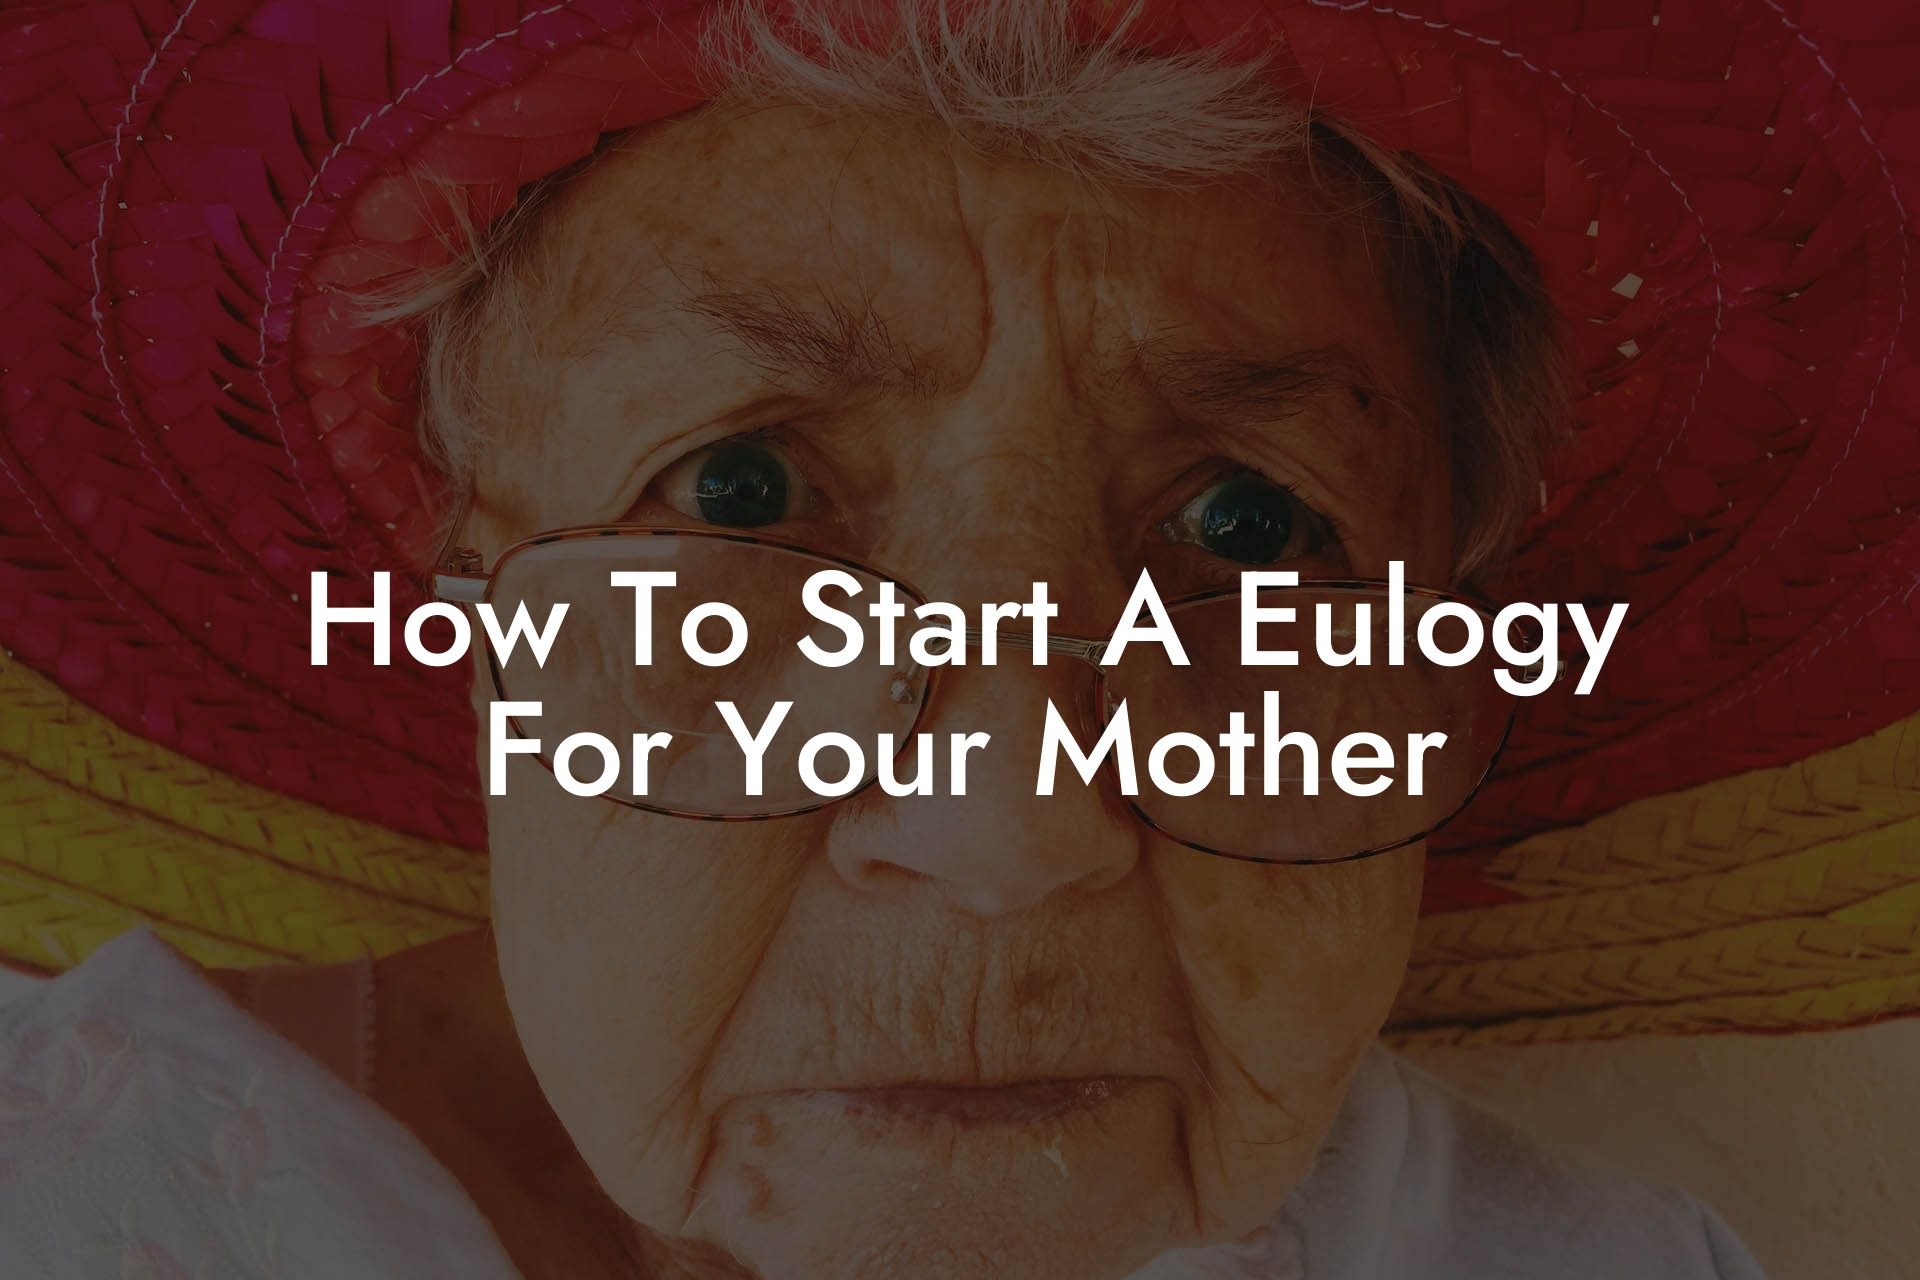 How To Start A Eulogy For Your Mother